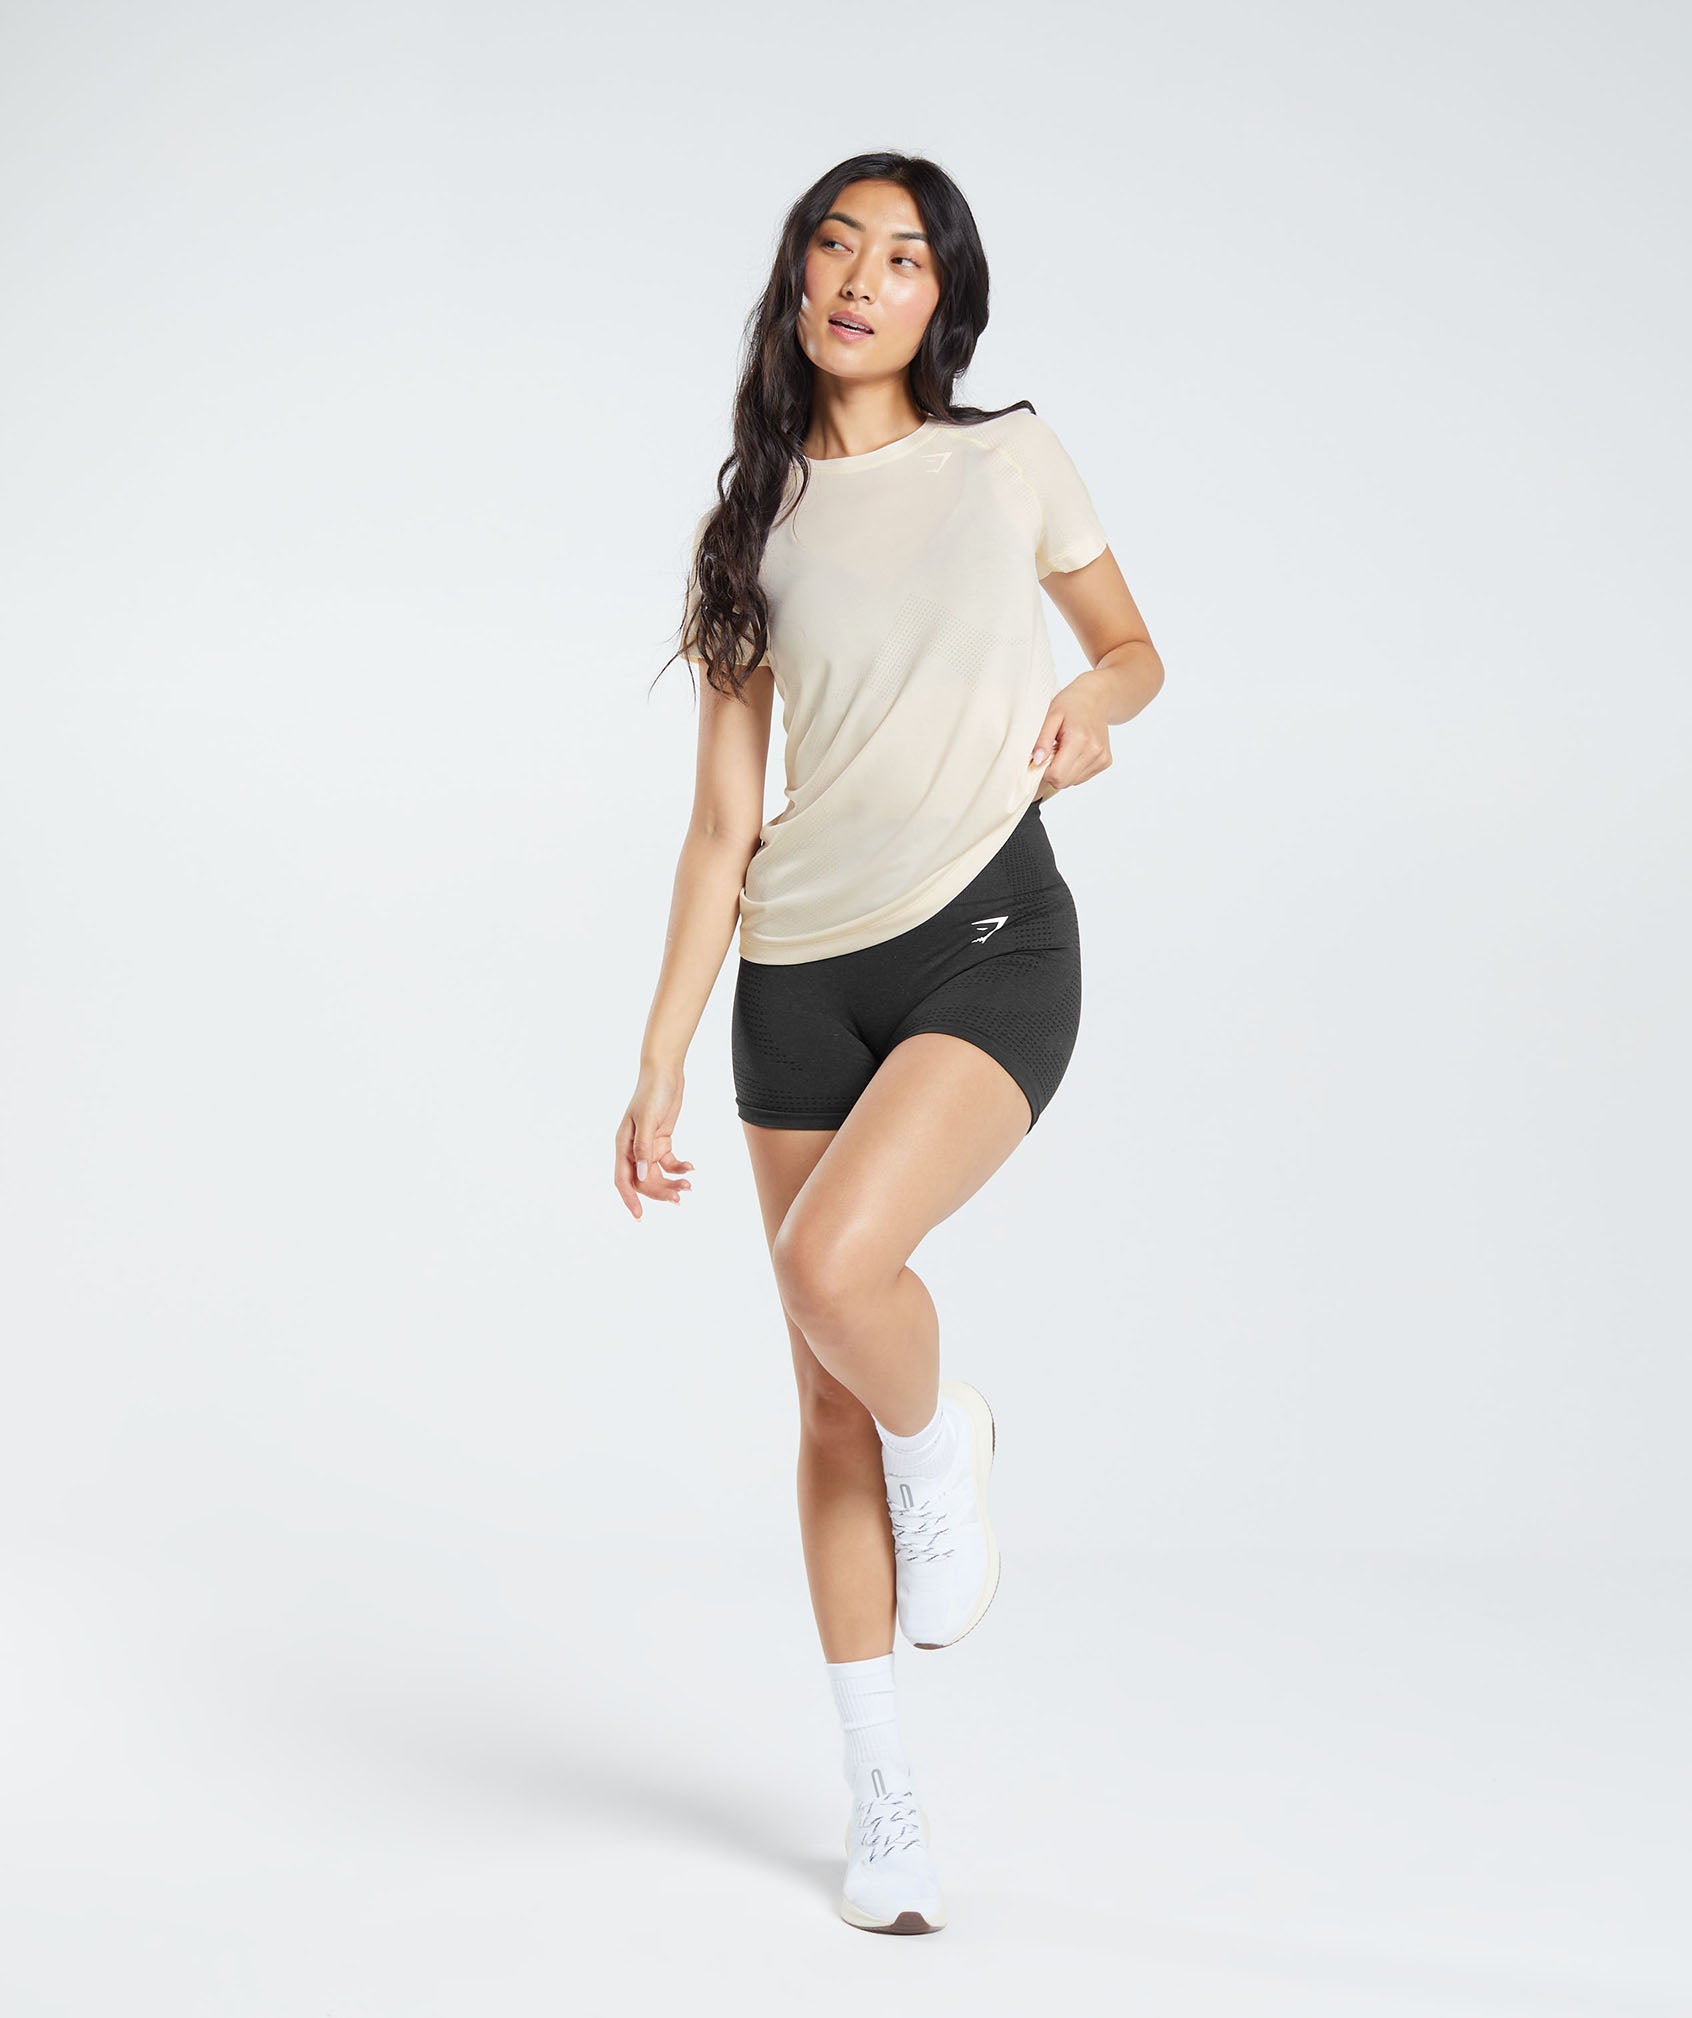 Vital Seamless 2.0 Light T-Shirt in Coconut White Marl - view 4